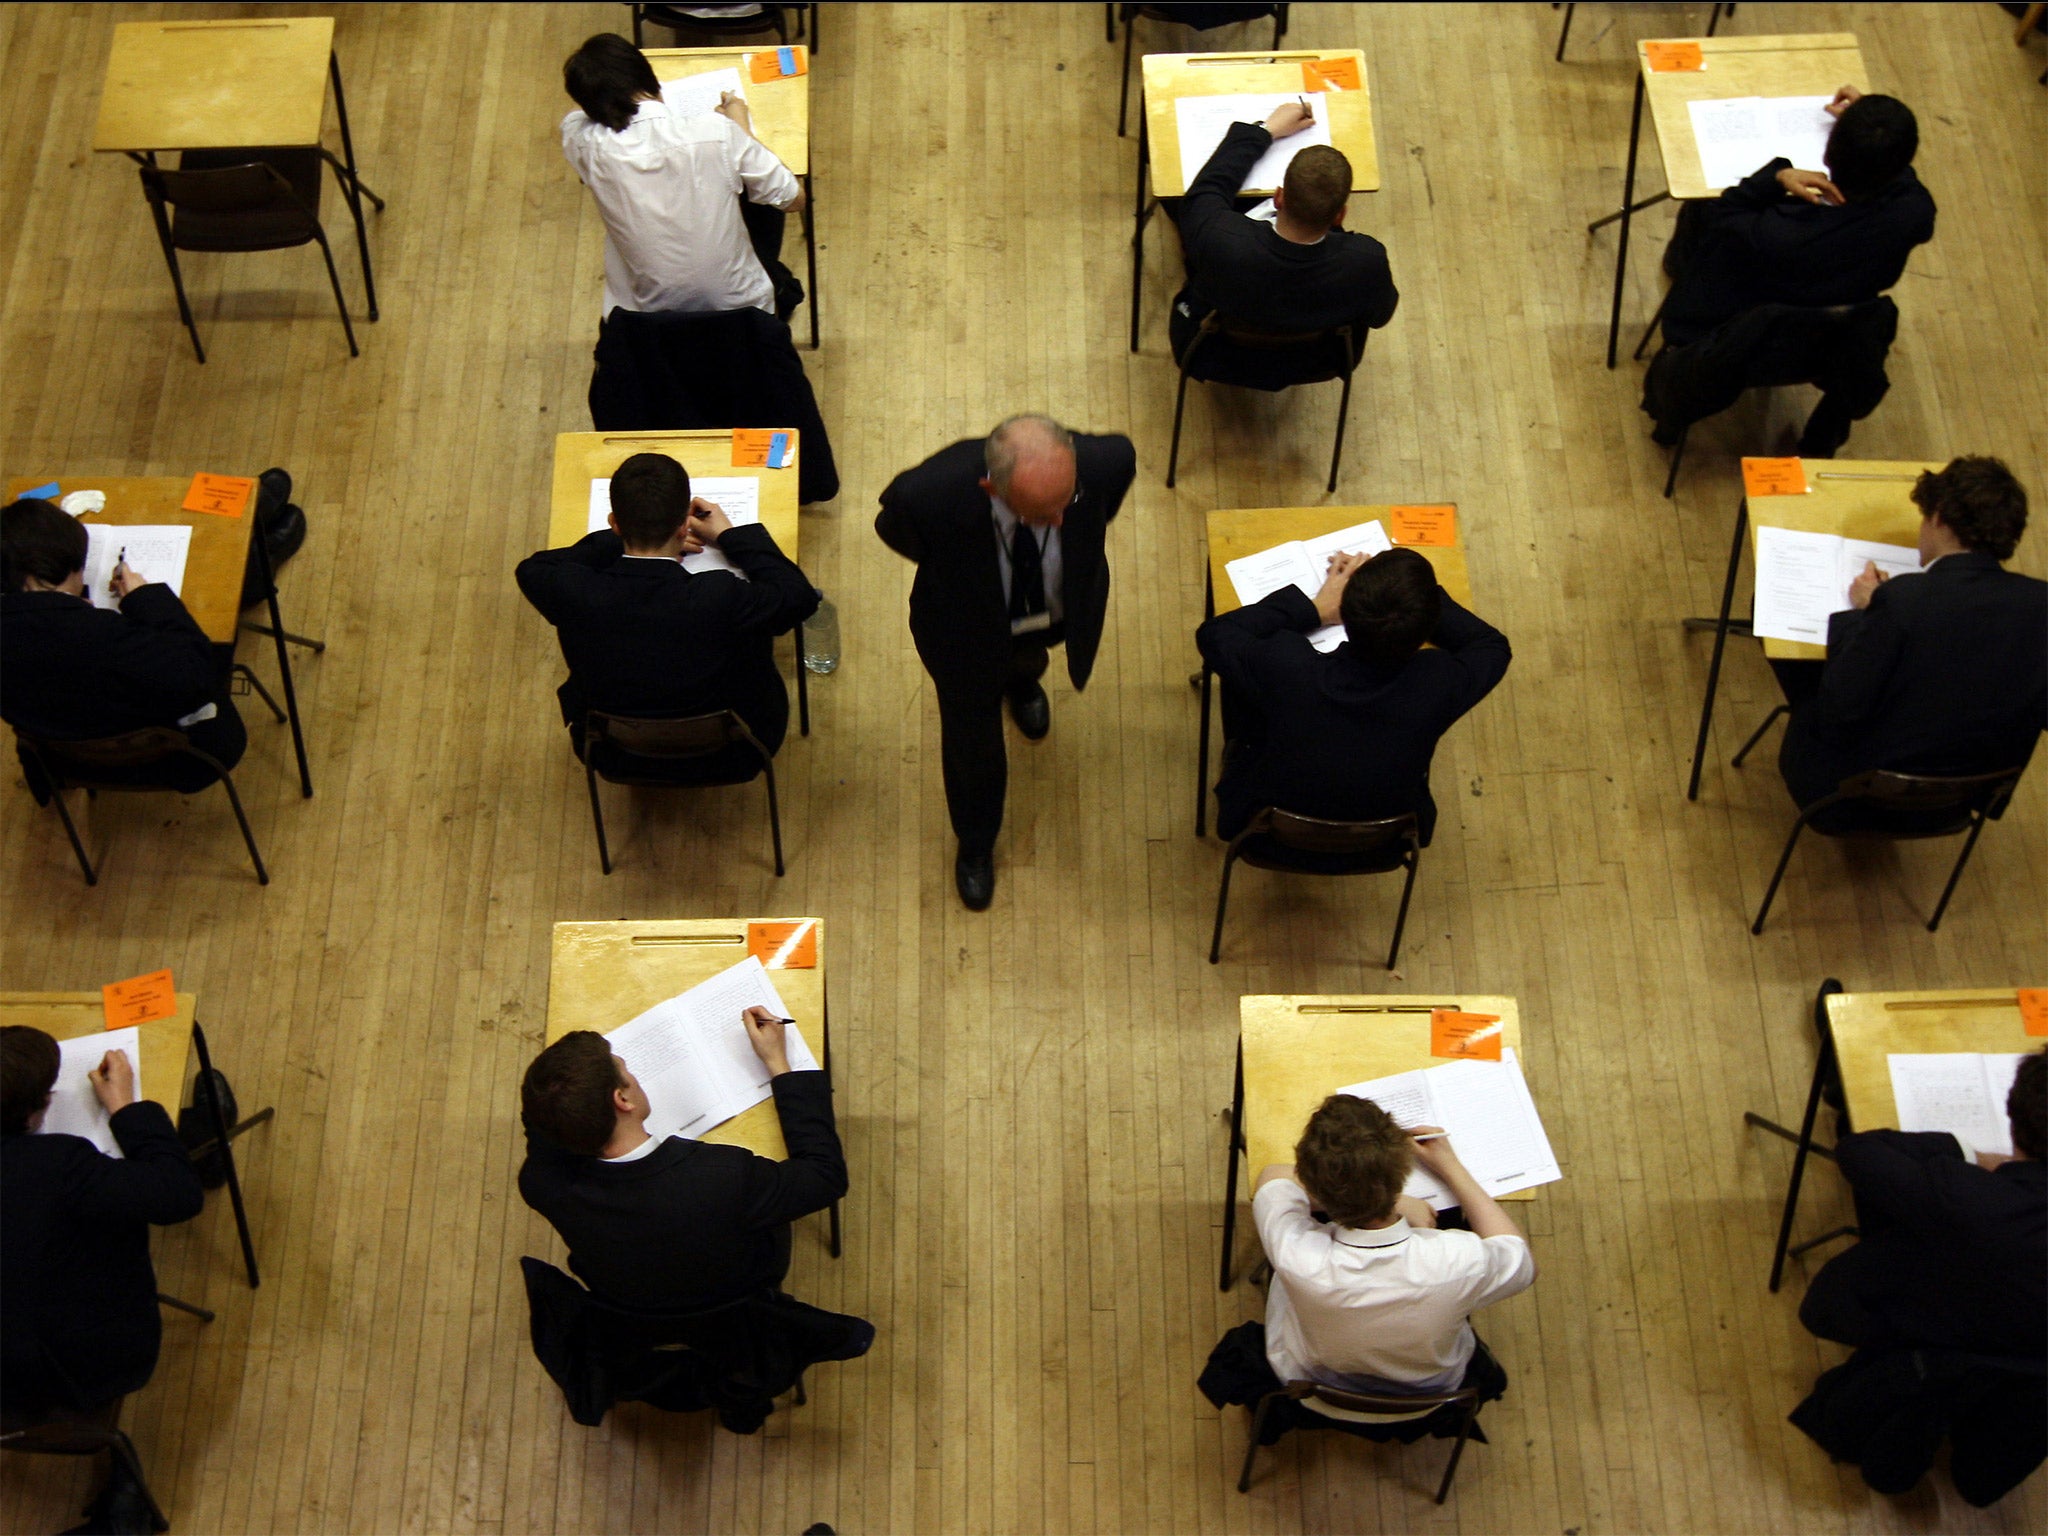 Pupils in London score higher GCSE results than those in the rest of the country, according to research